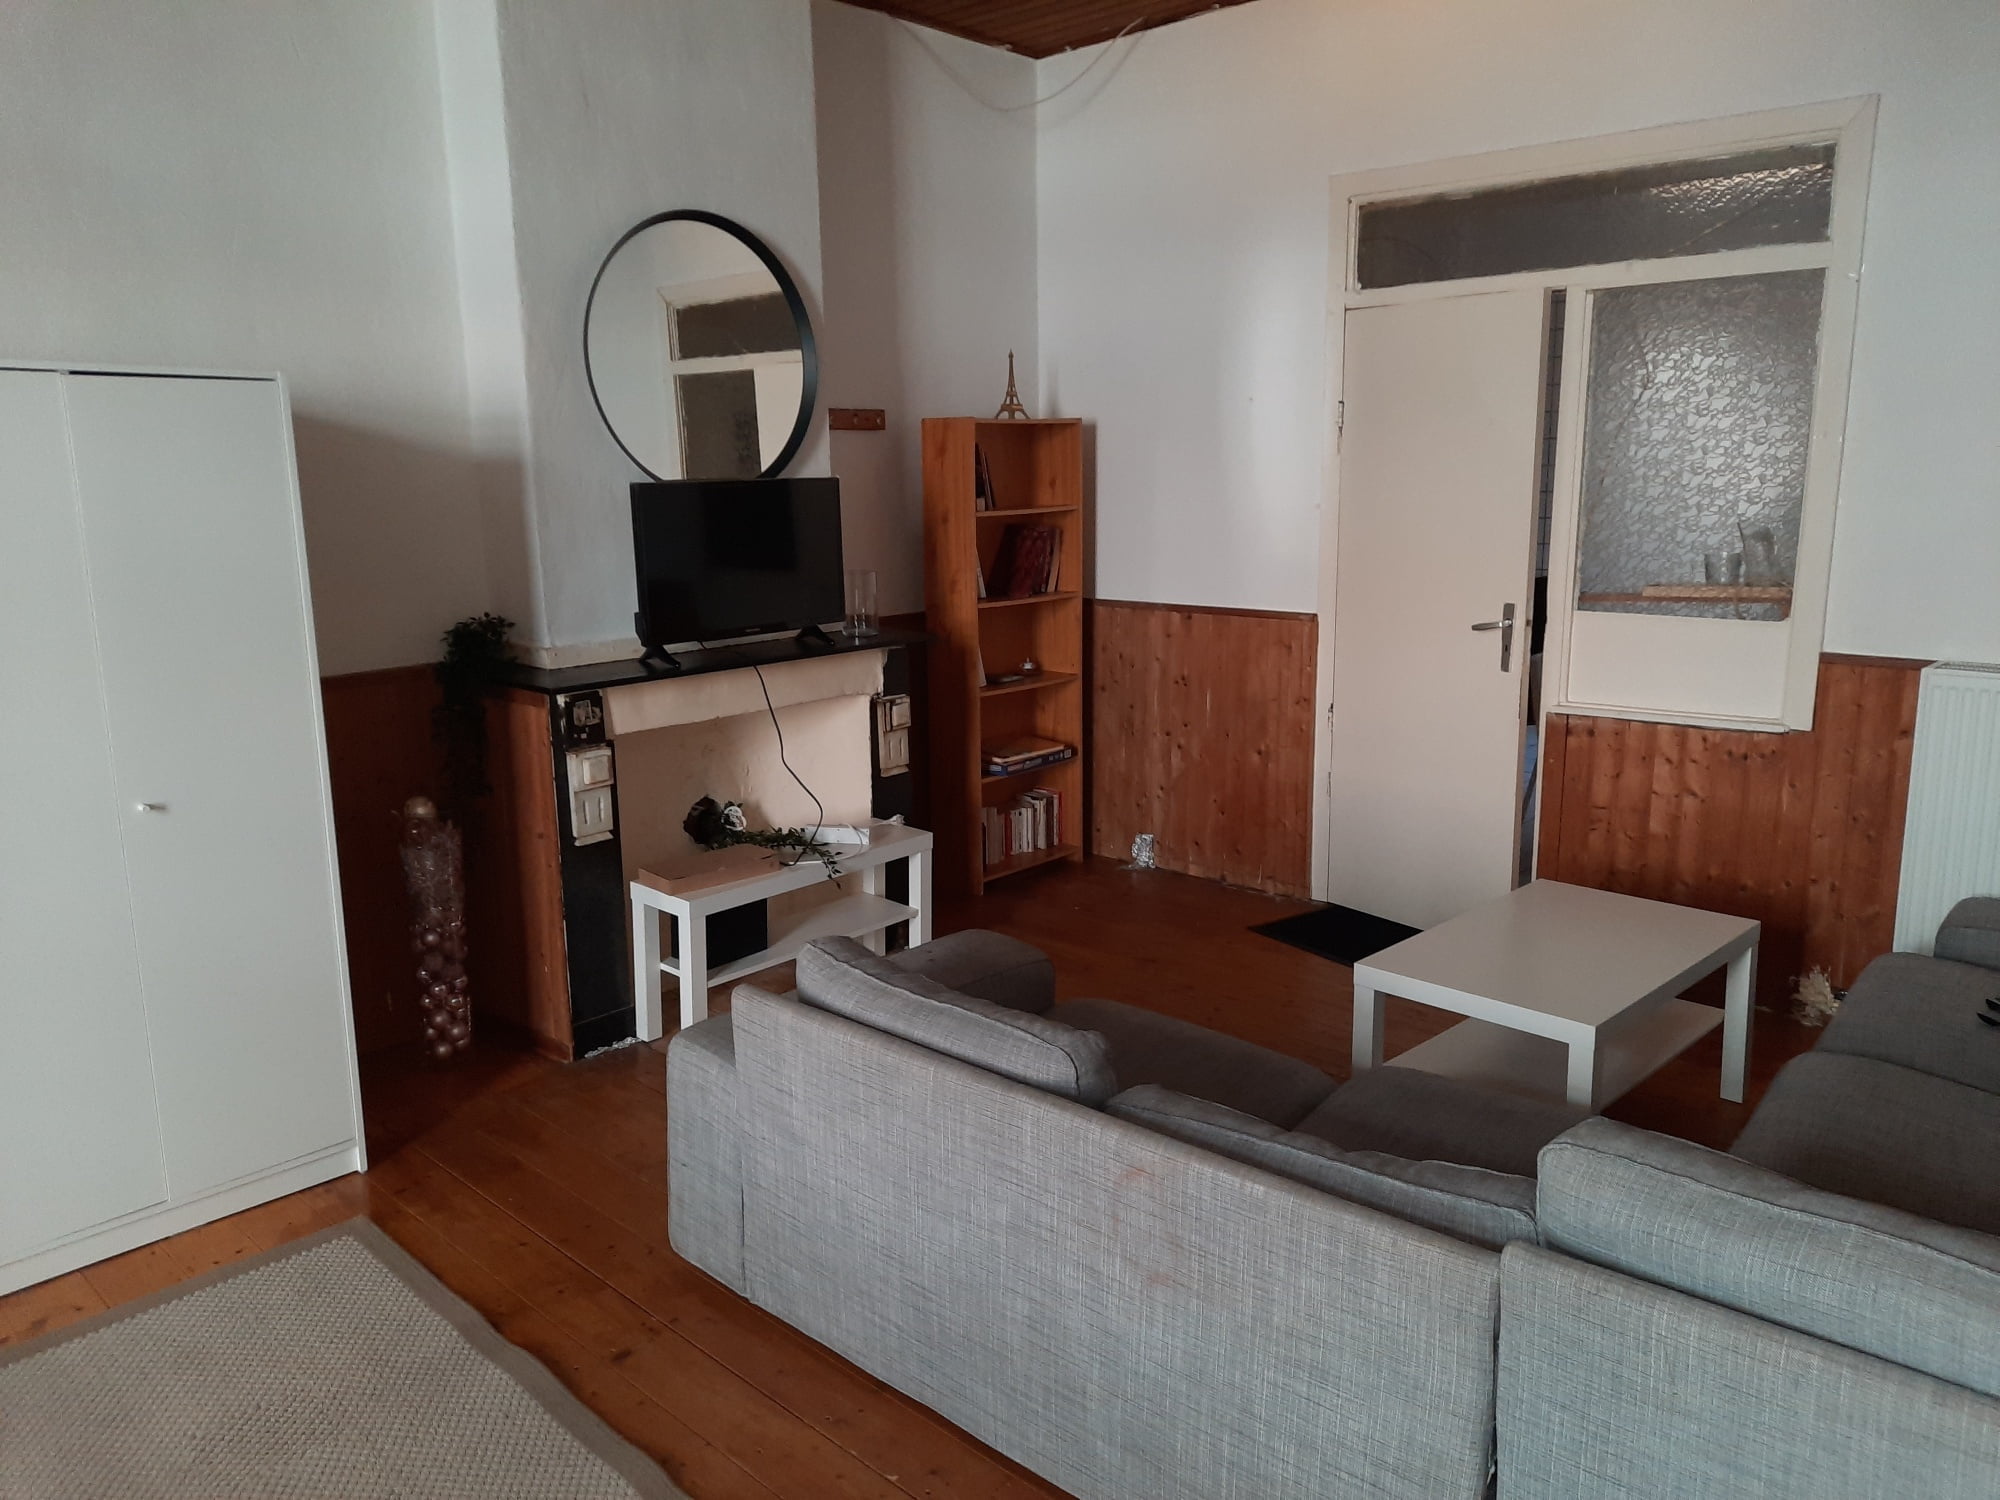 Paleis 2 - Furnished accommodation for rent in Antwerp 1